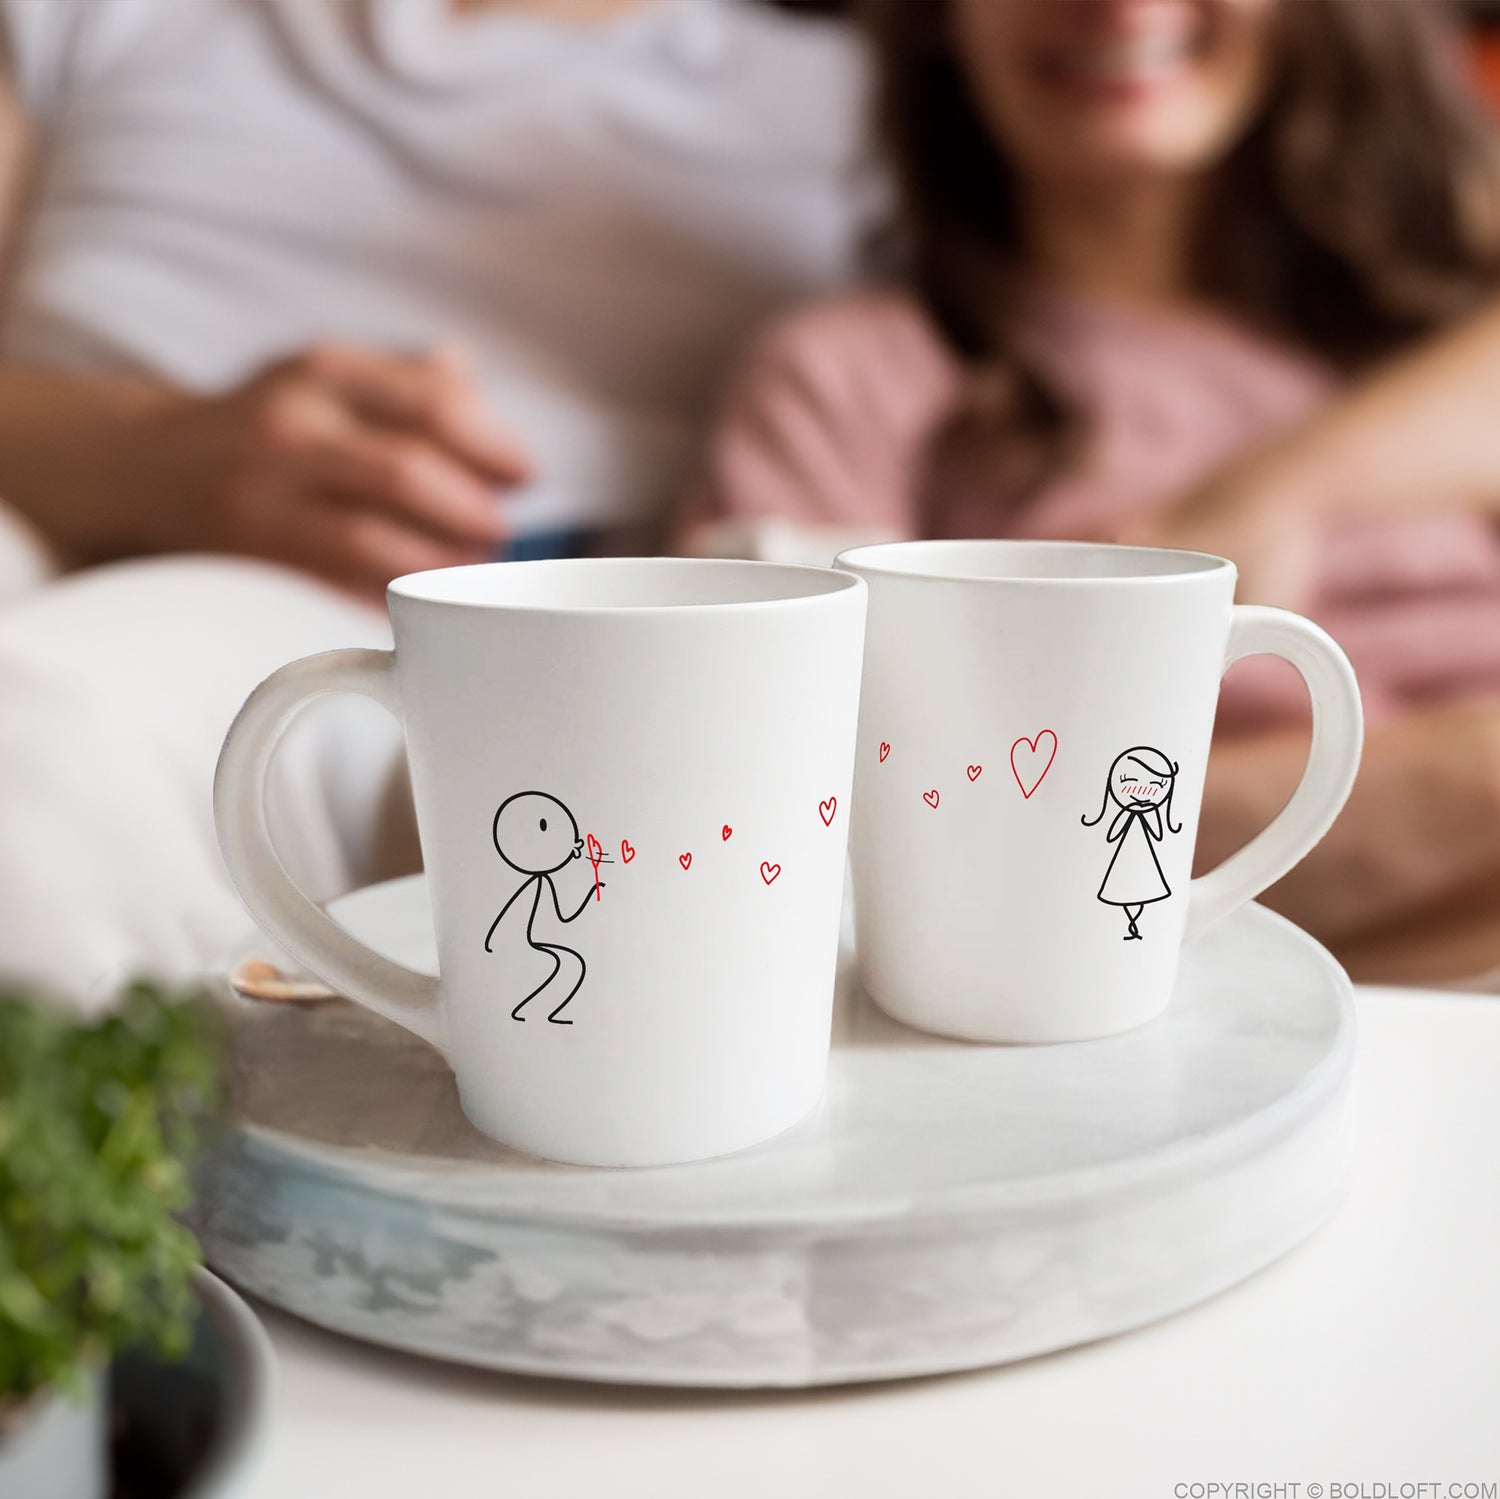 BoldLoft From My Heart to Yours Couple Mugs for Him and Her feature heart-felt design with a boy blowing heart-shaped bubbles to a girl